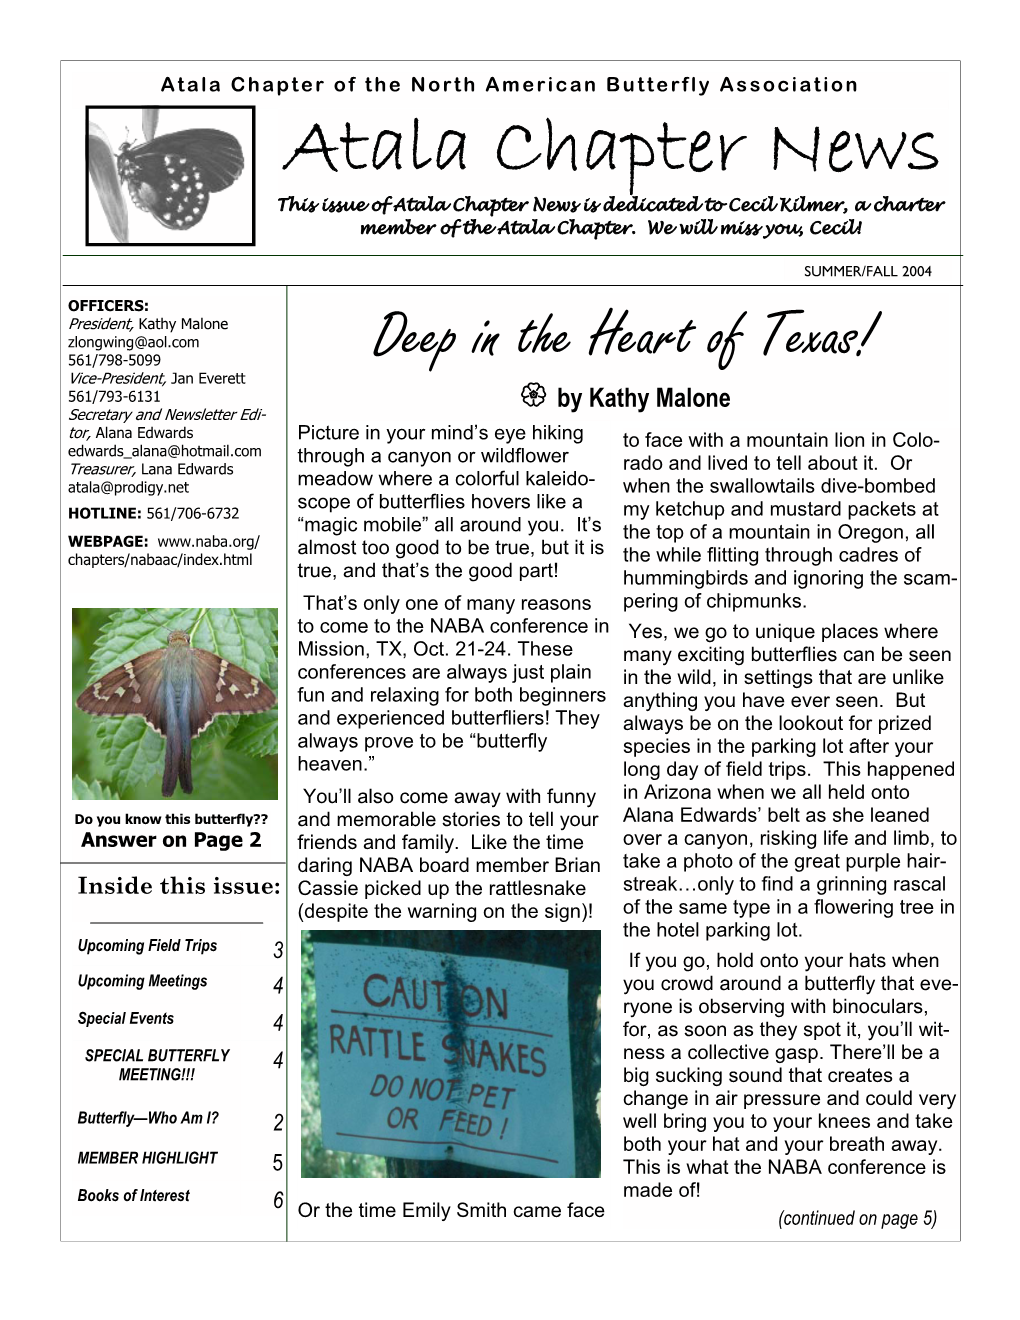 Atala Chapter News This Issue of Atala Chapter News Is Dedicated to Cecil Kilmer, a Charter Member of the Atala Chapter